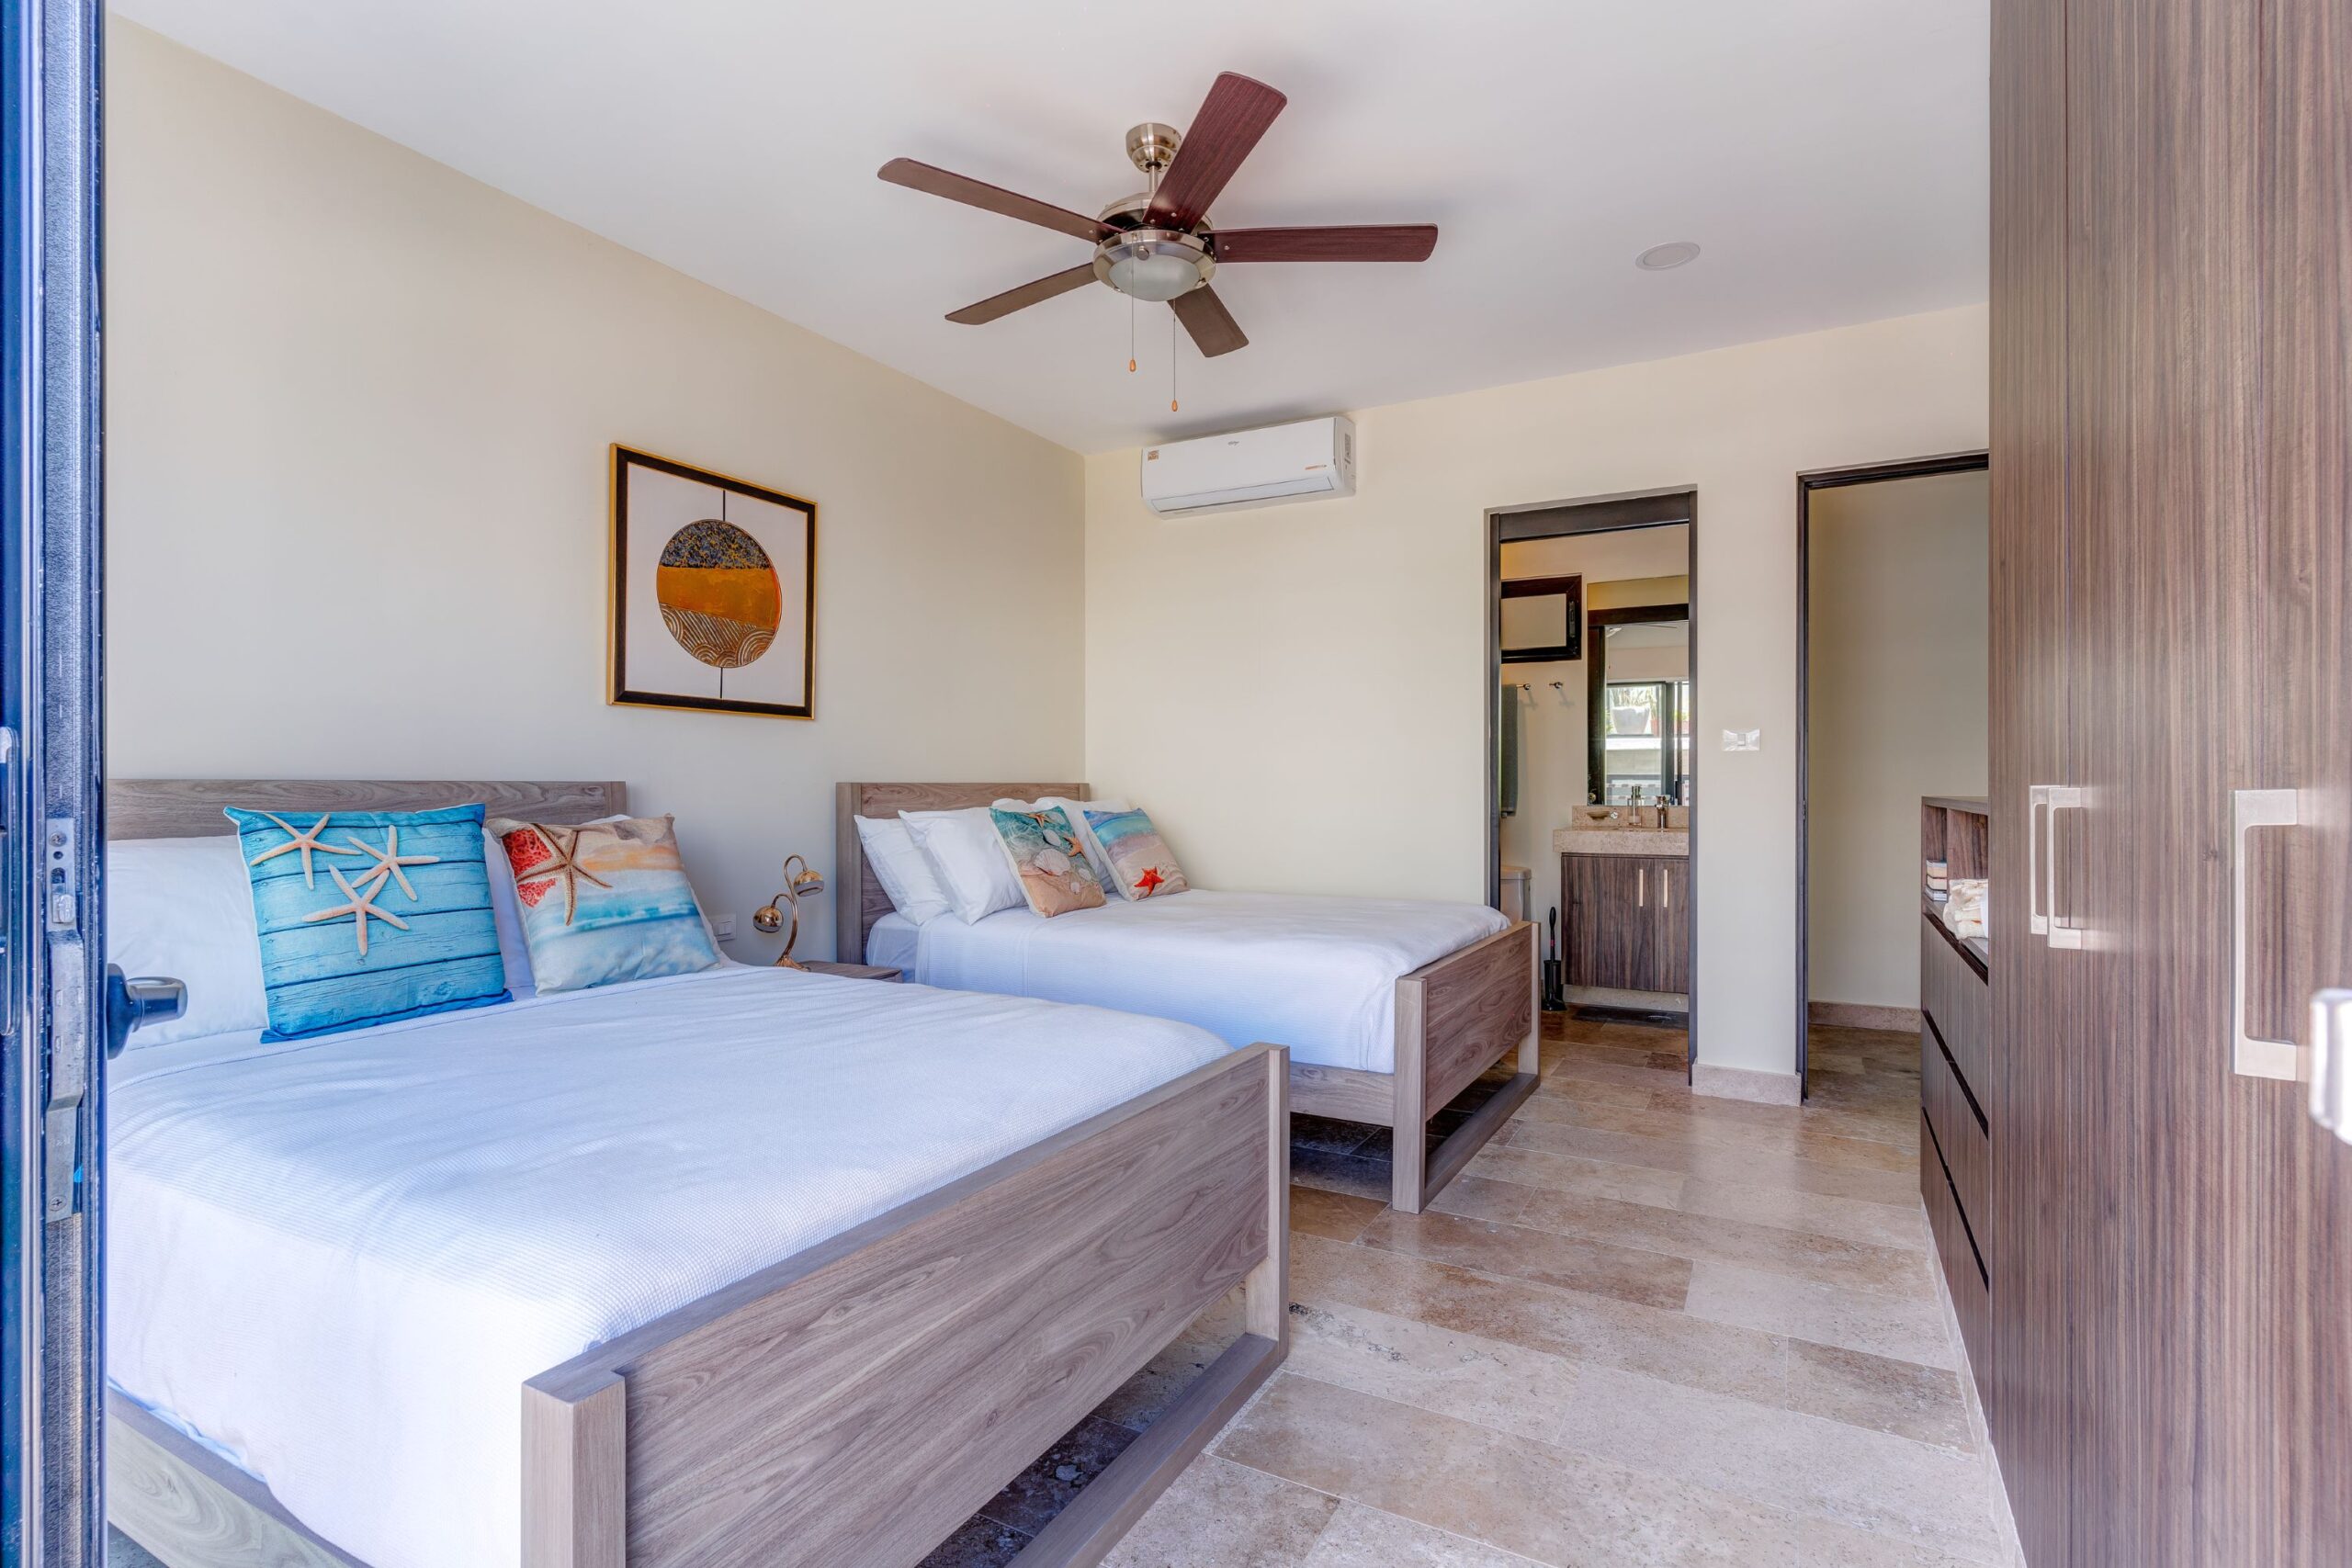 j playa del carmen mexico real estate penthouse arenis guest´s bedroom